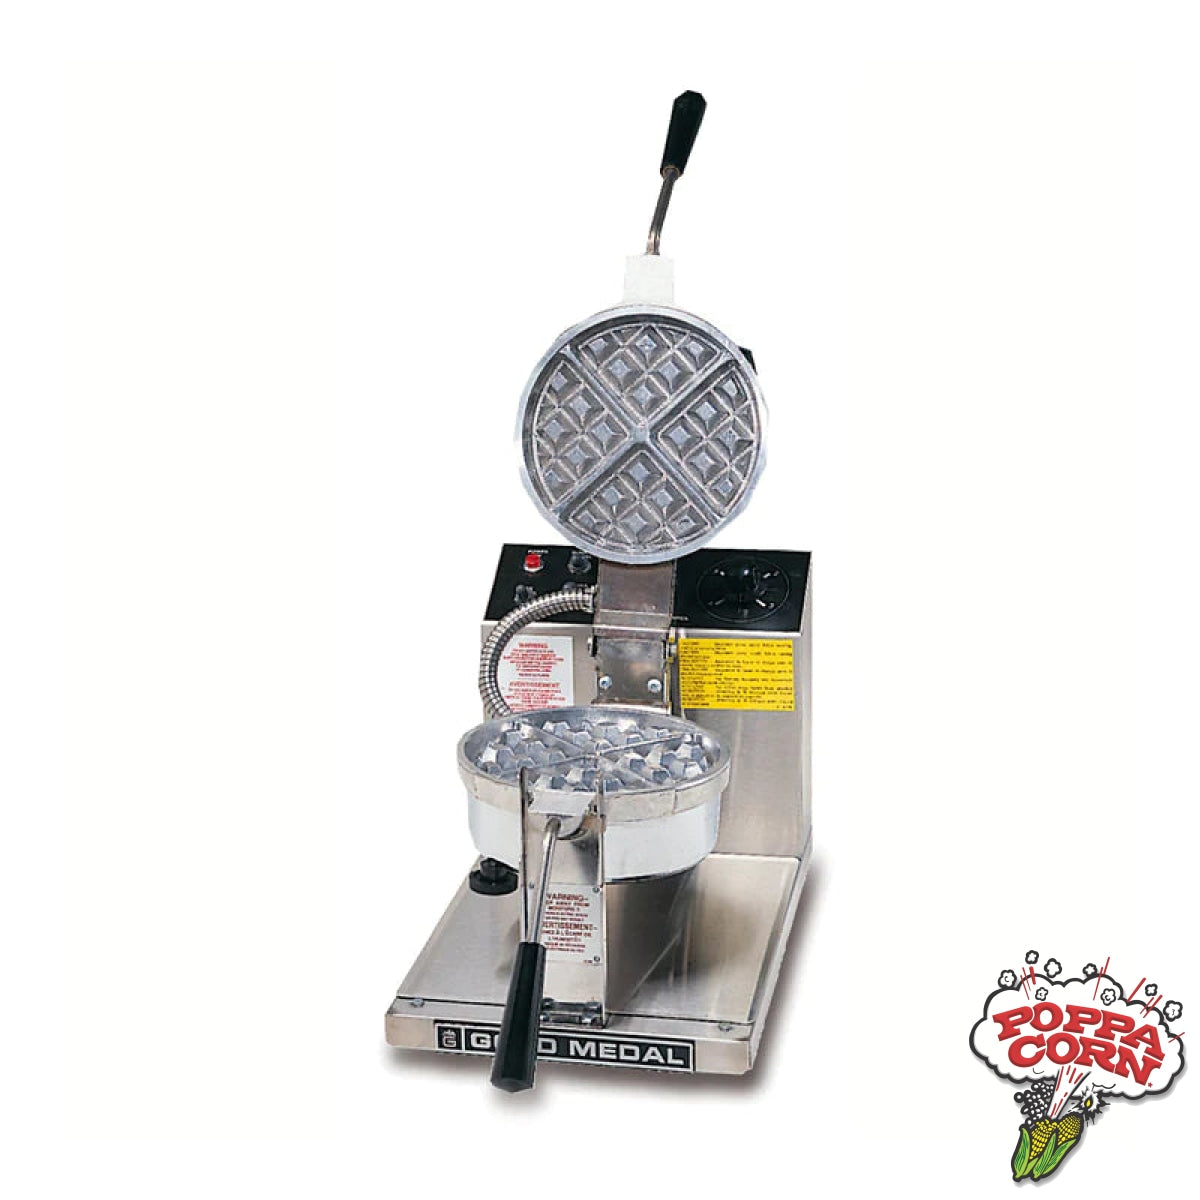 Removable Grid Round Belgian Waffle Baker with Electronic Control - GM5042E - Poppa Corn Corp